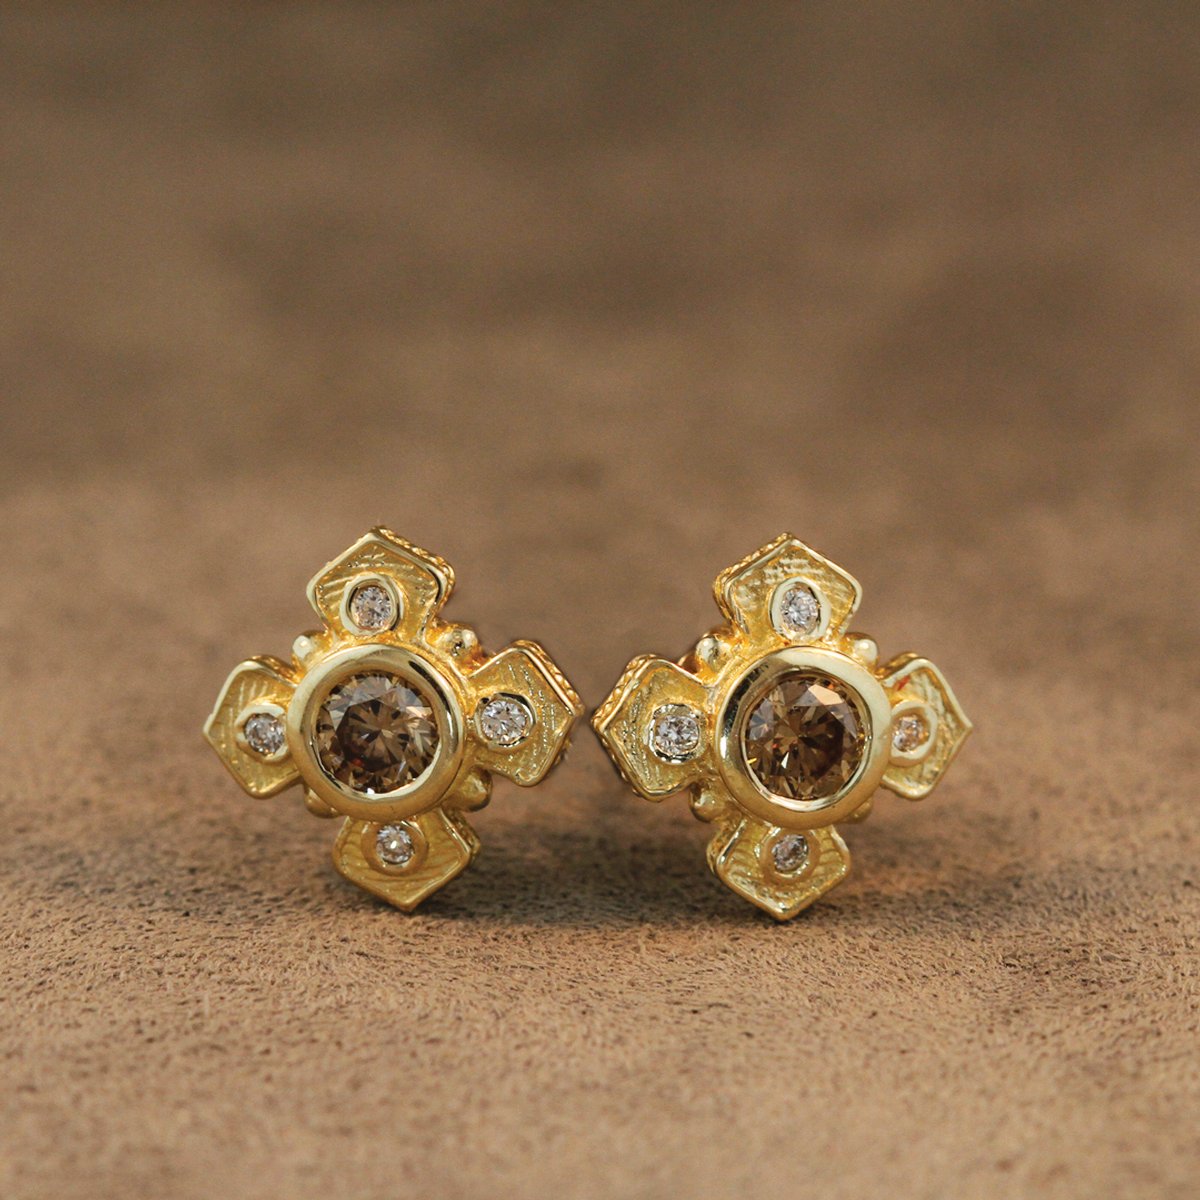 Persephone 14K Gold, Champagne and White Diamond Earrings